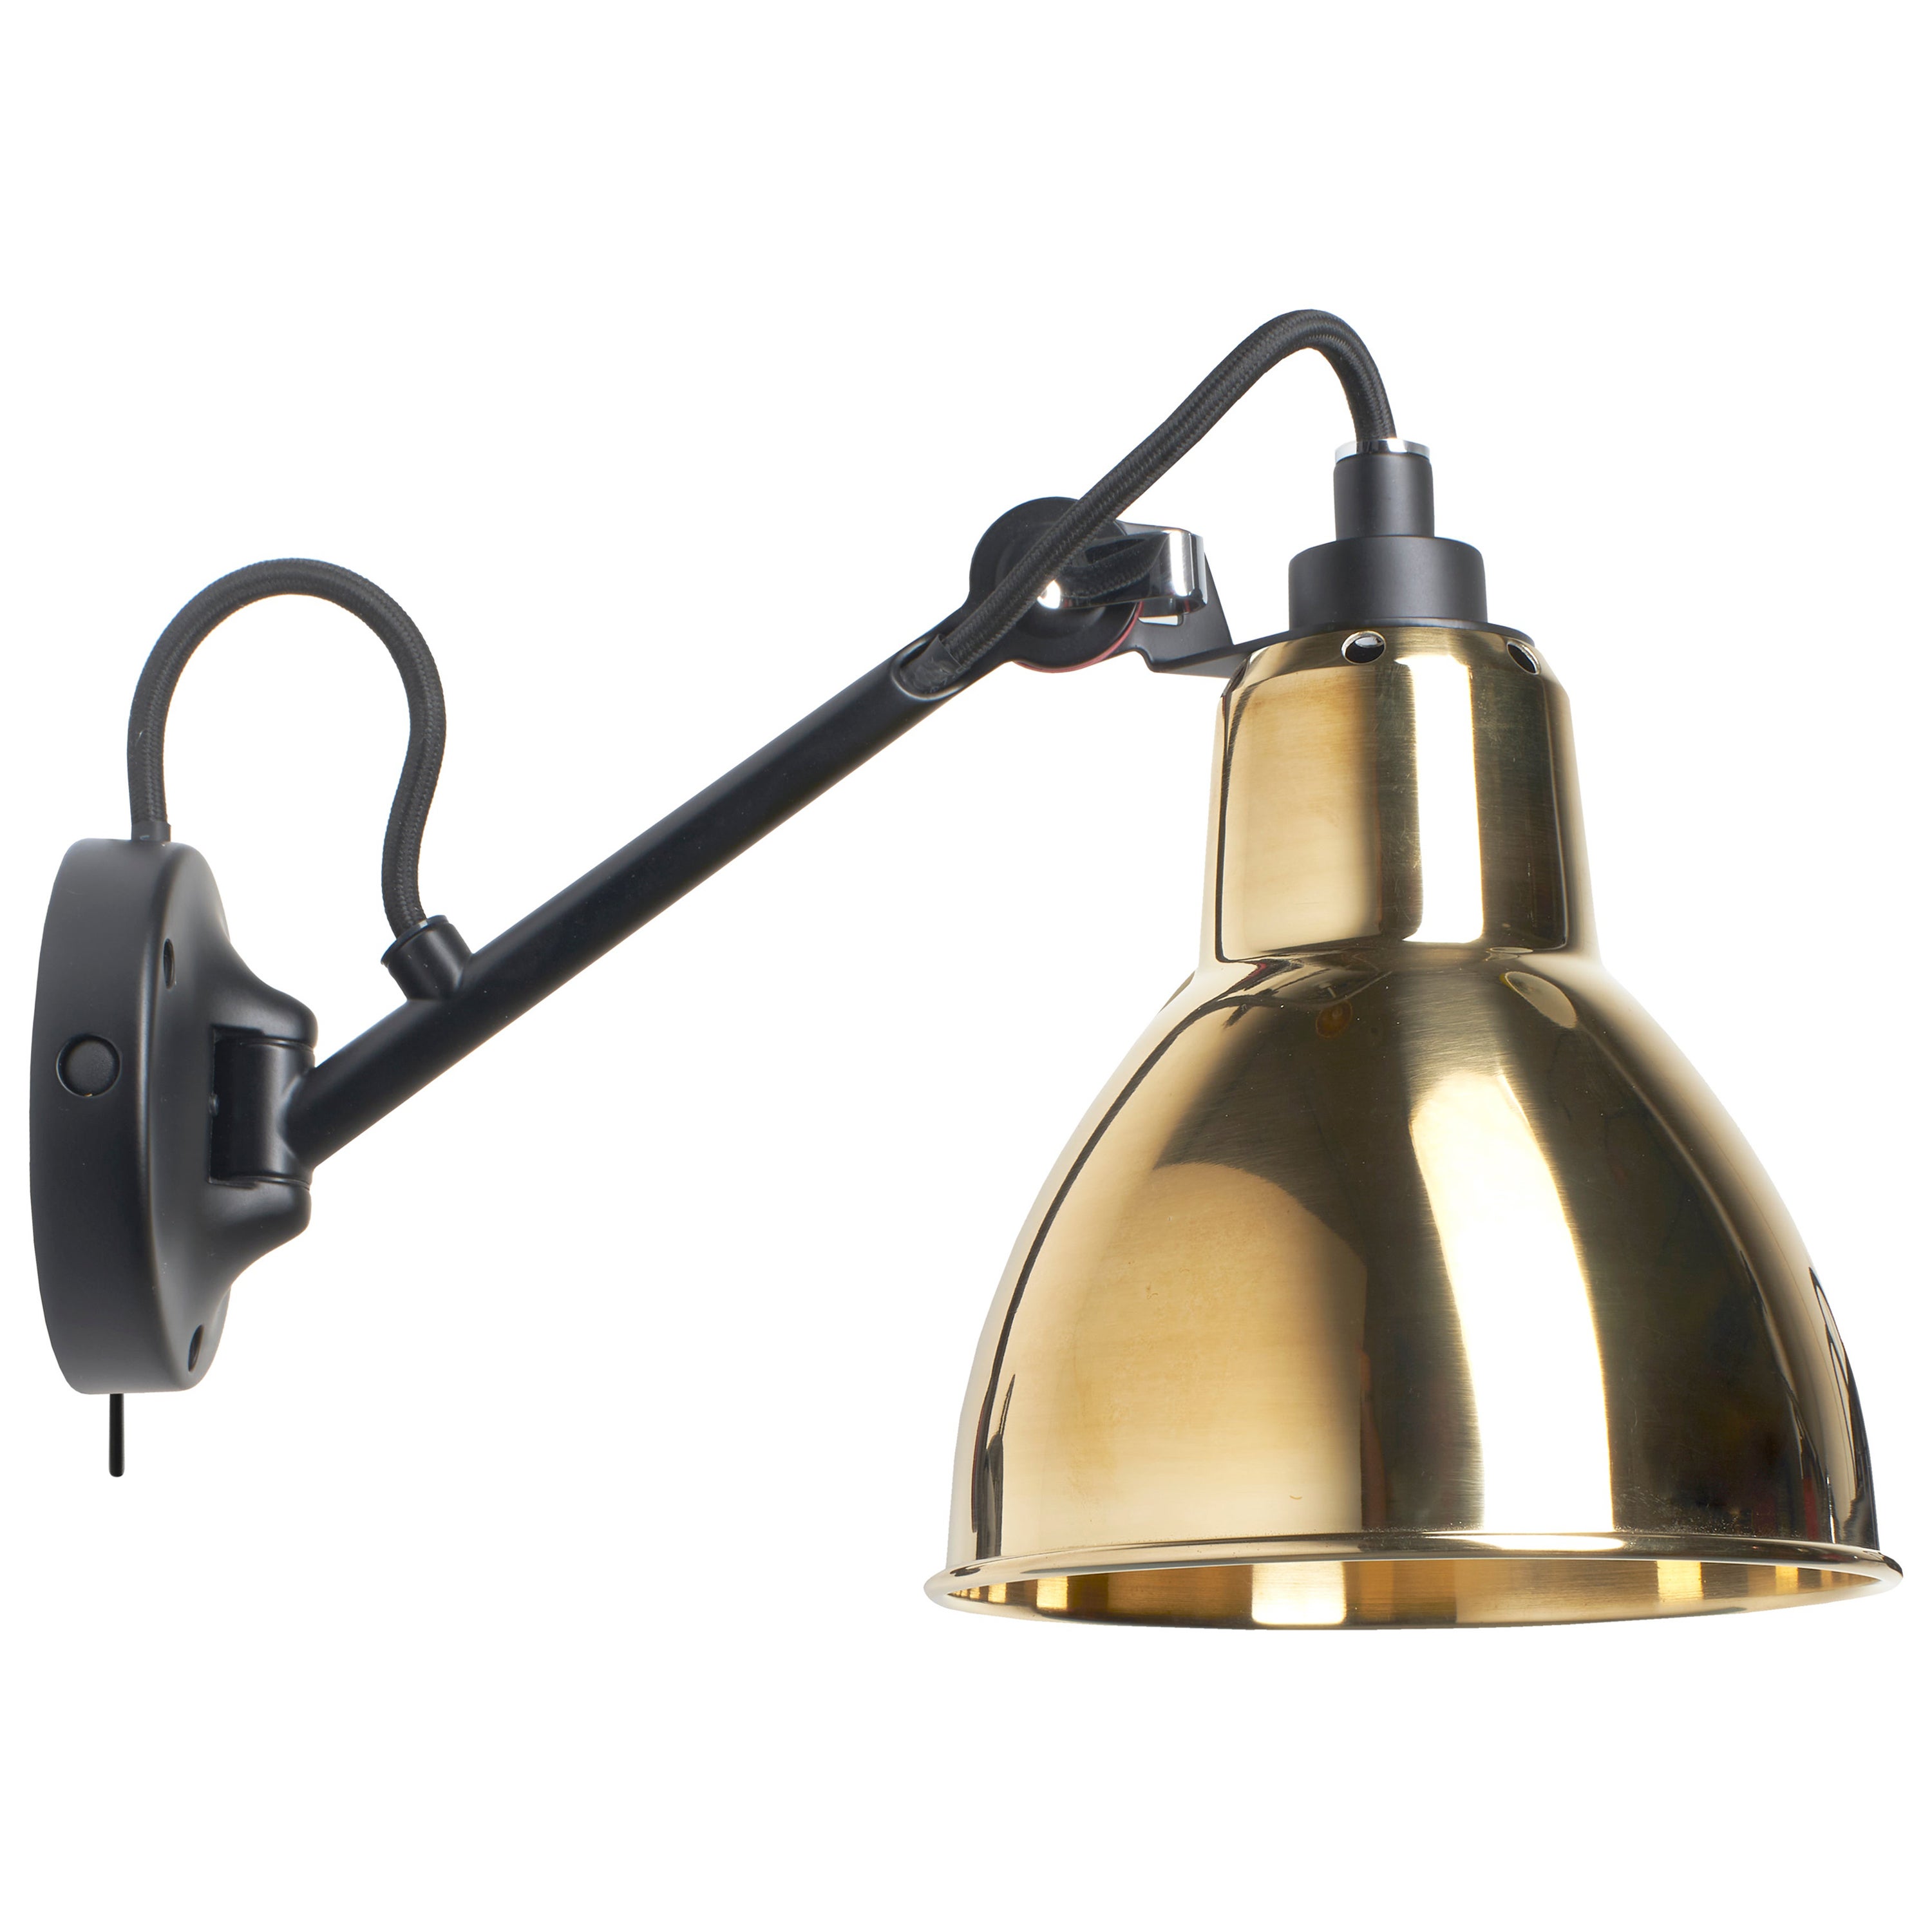 DCW Editions La Lampe Gras N°104 SW Wall Lamp in Black Arm and Brass Shade For Sale